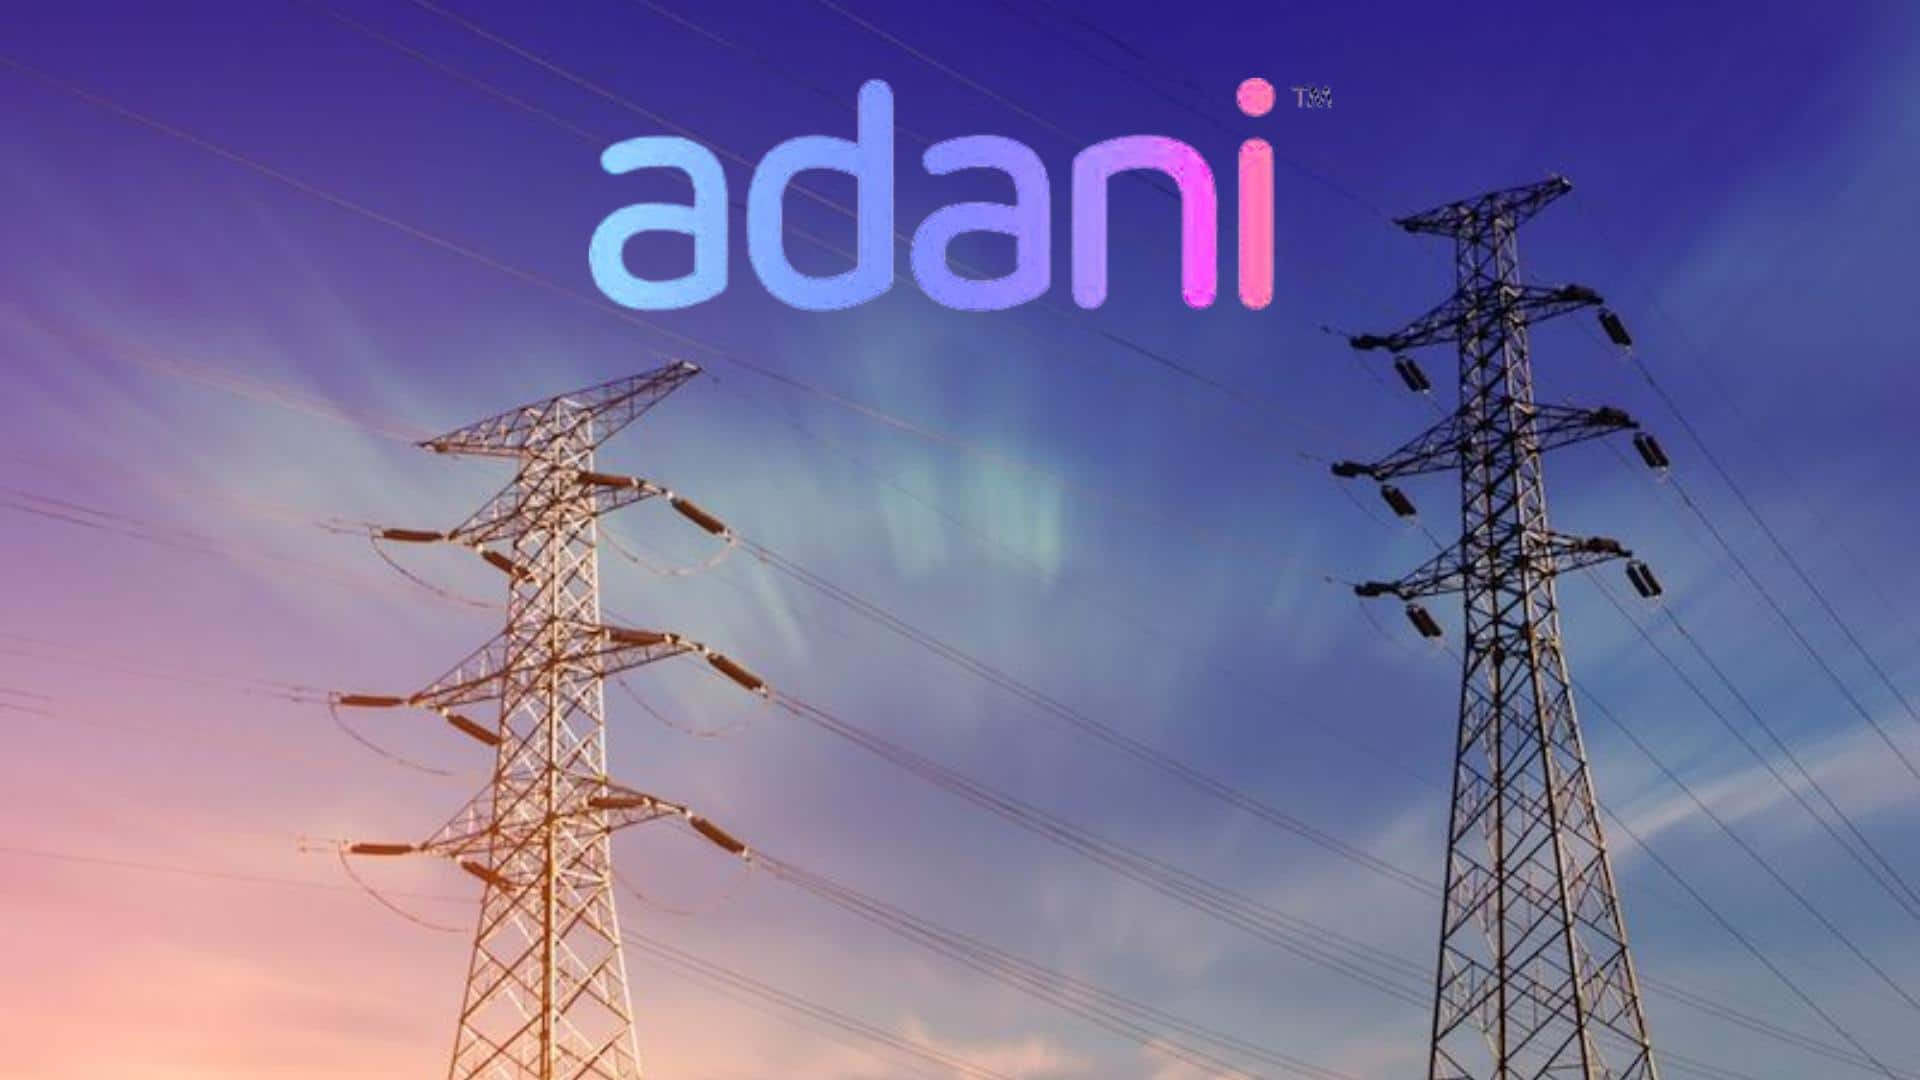 Adani Power shares skyrocket to record highs: What's fueling rally?